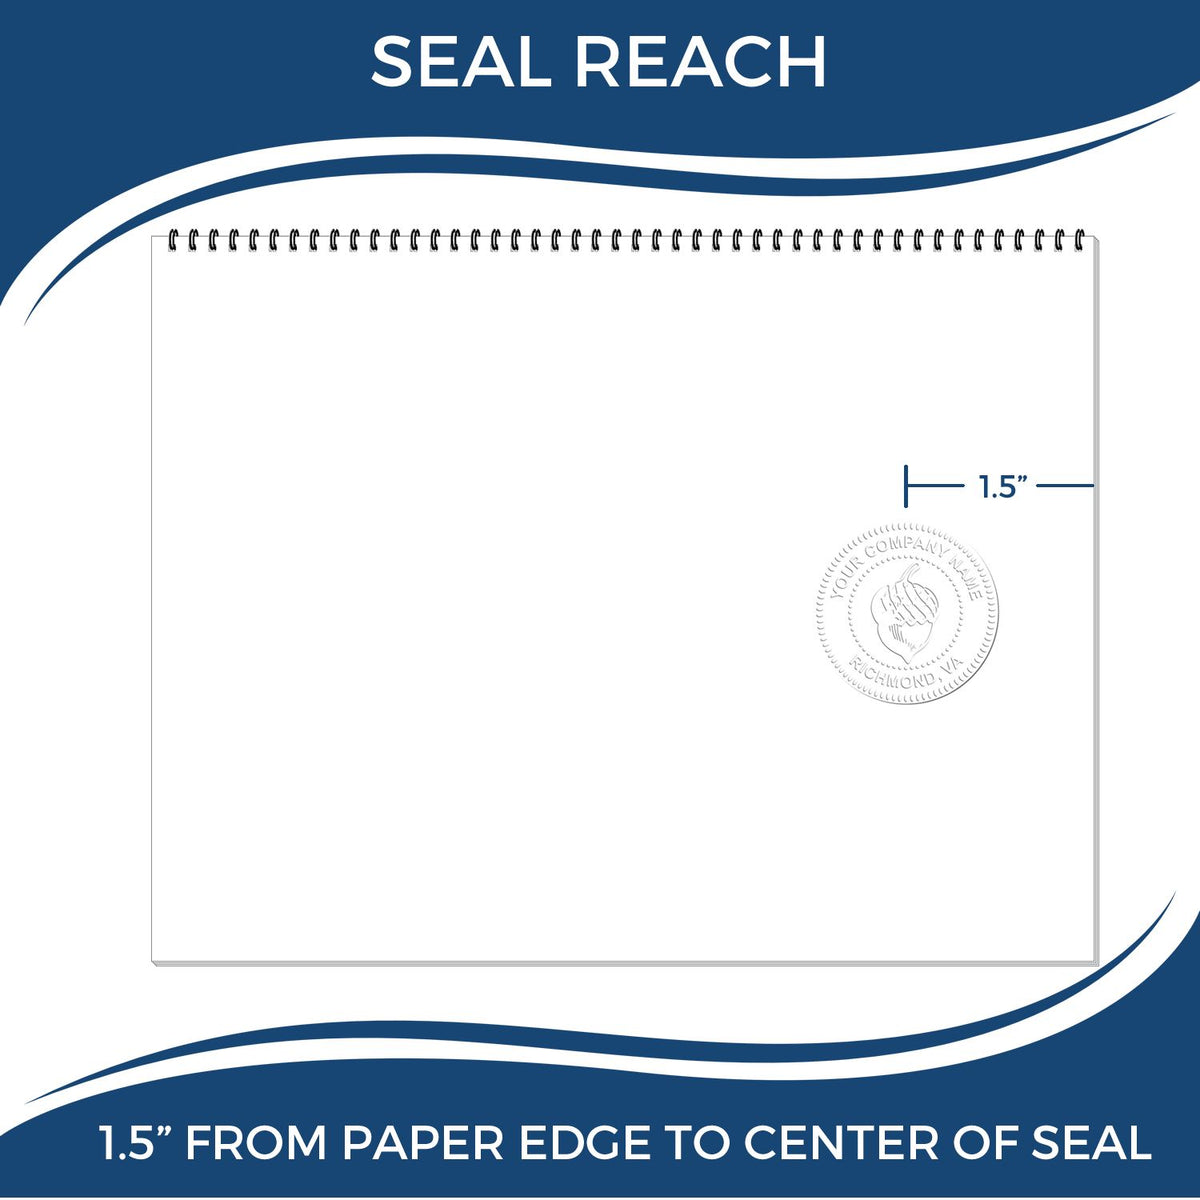 An infographic showing the seal reach which is represented by a ruler and a miniature seal image of the Hybrid Alabama Engineer Seal